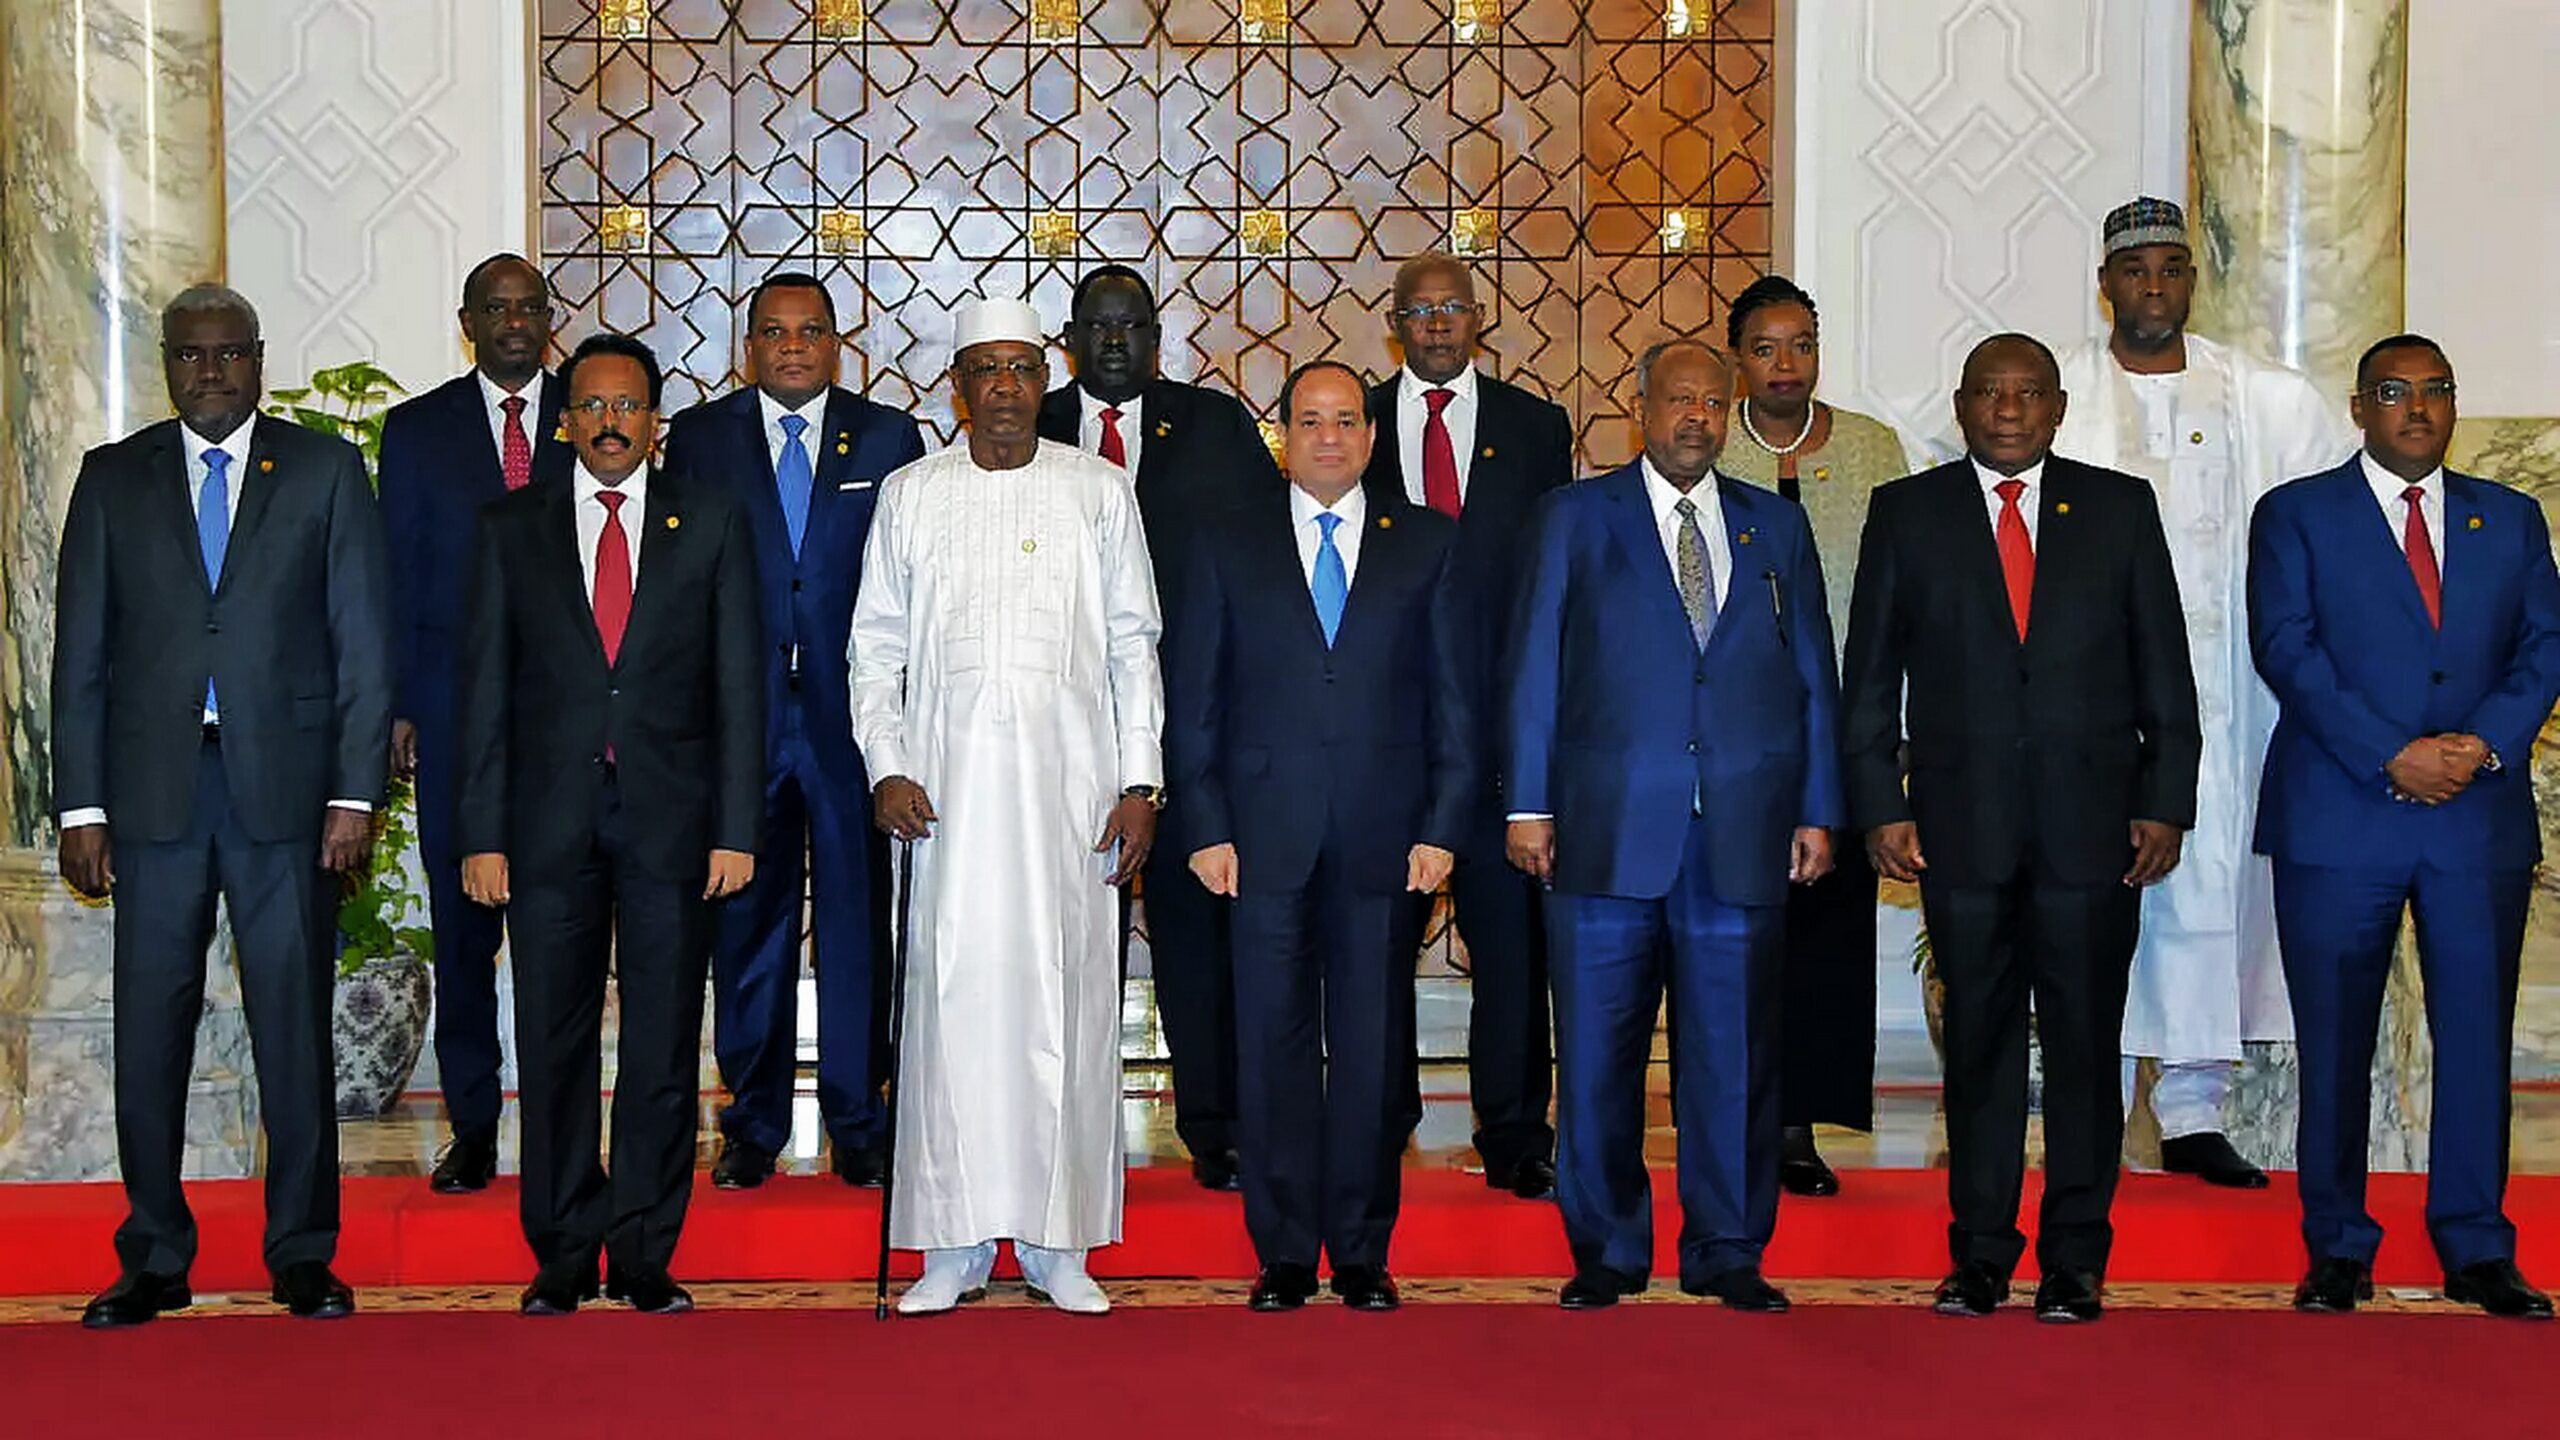 AA picture of the African leaders who stand up for Africans